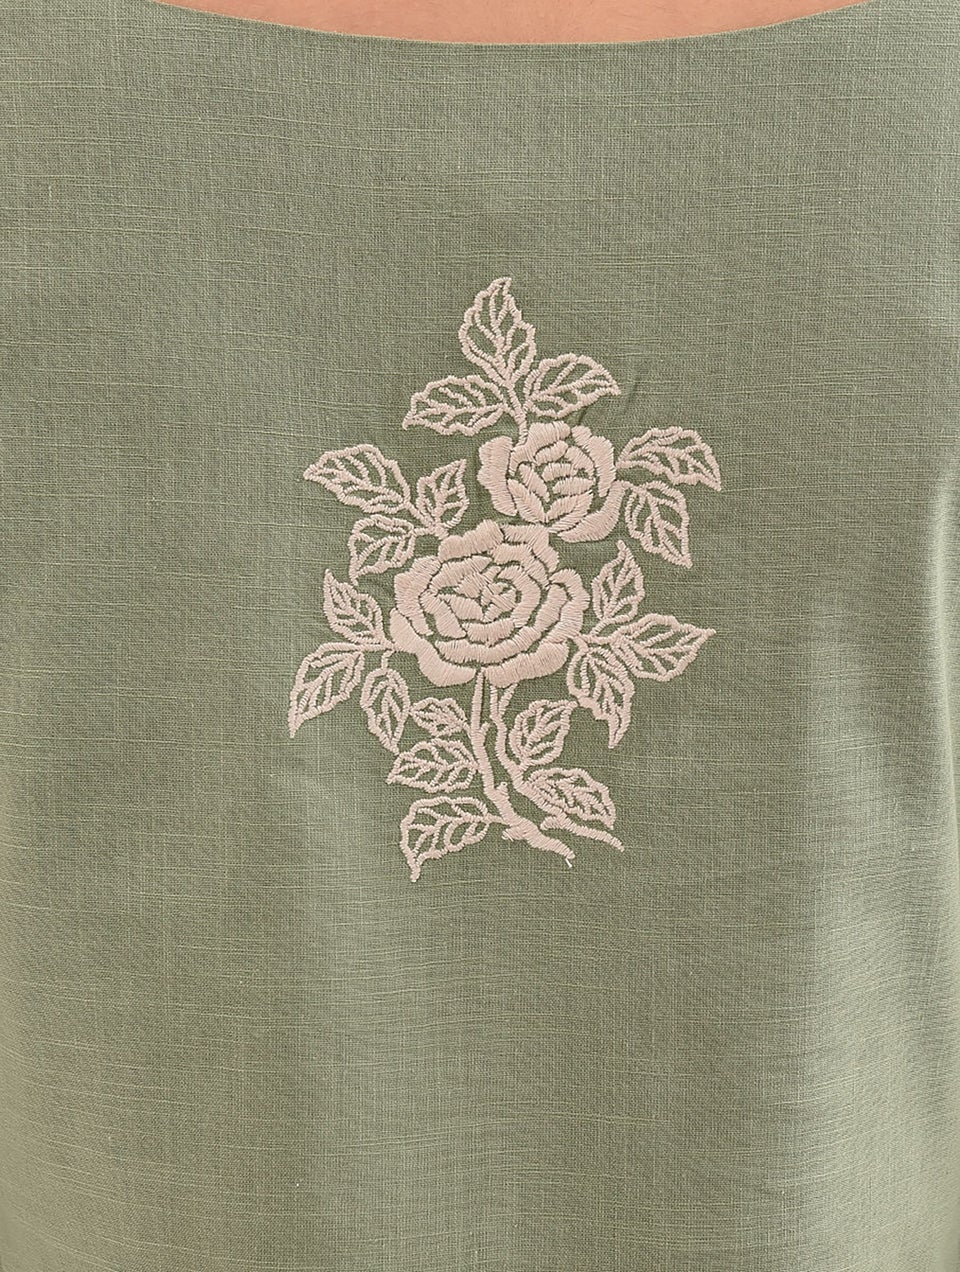 Women Green Embroidered Cotton Tunic - XS